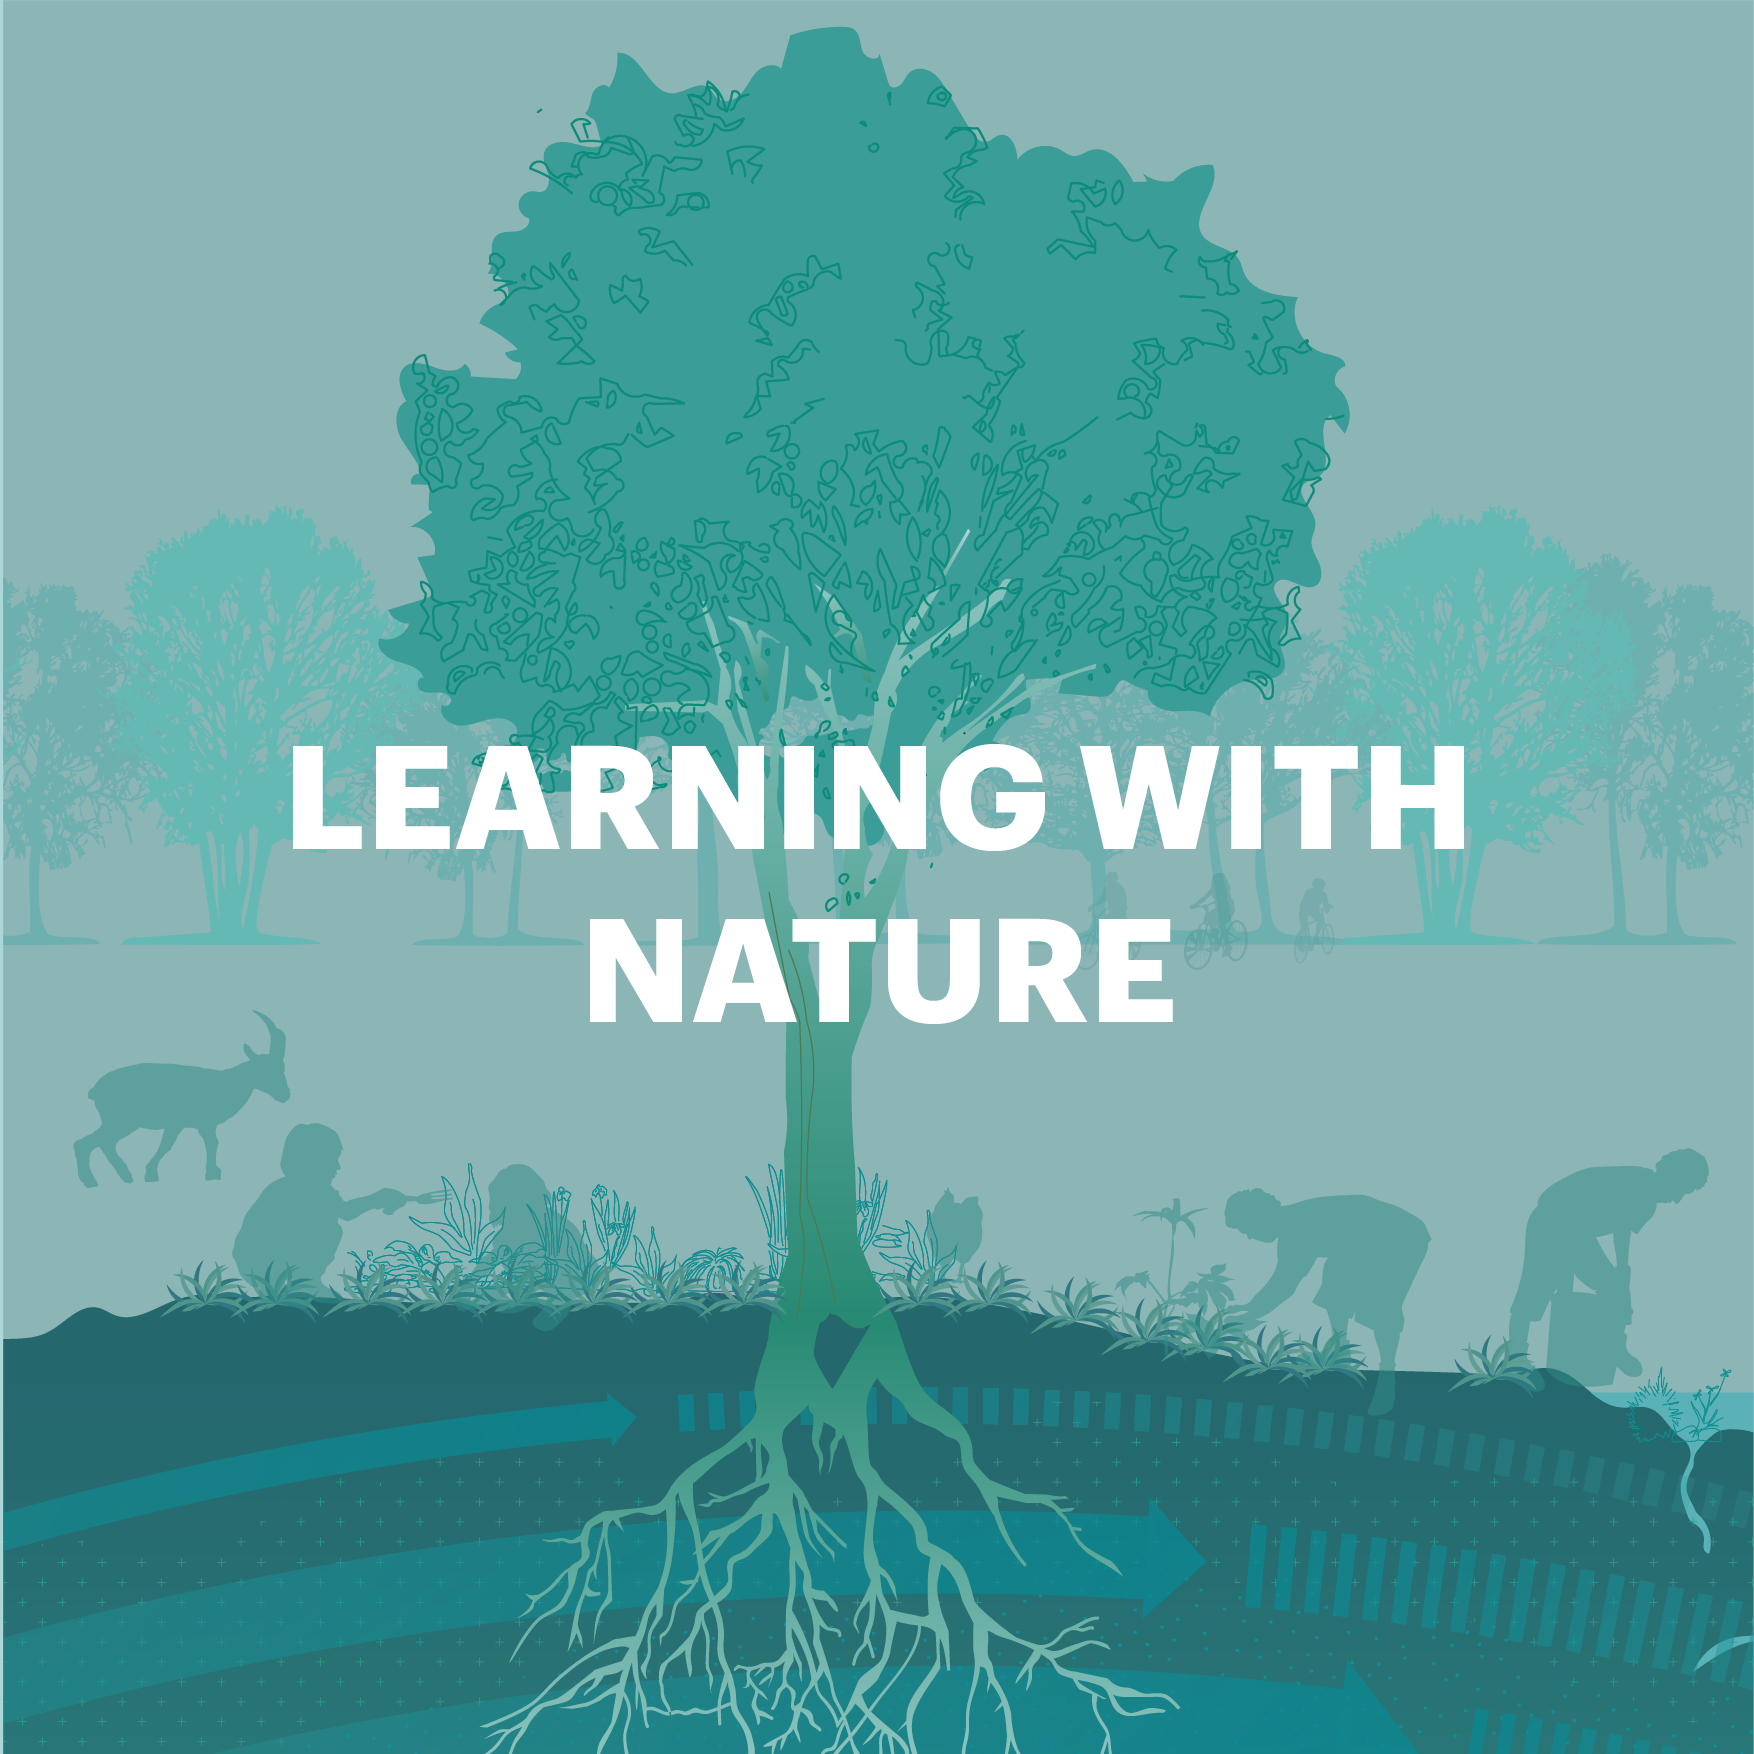 What if we applied nature’s principles to encourage learning and help us reconnect with our inherent natural systems to promote a sustainable future for all?